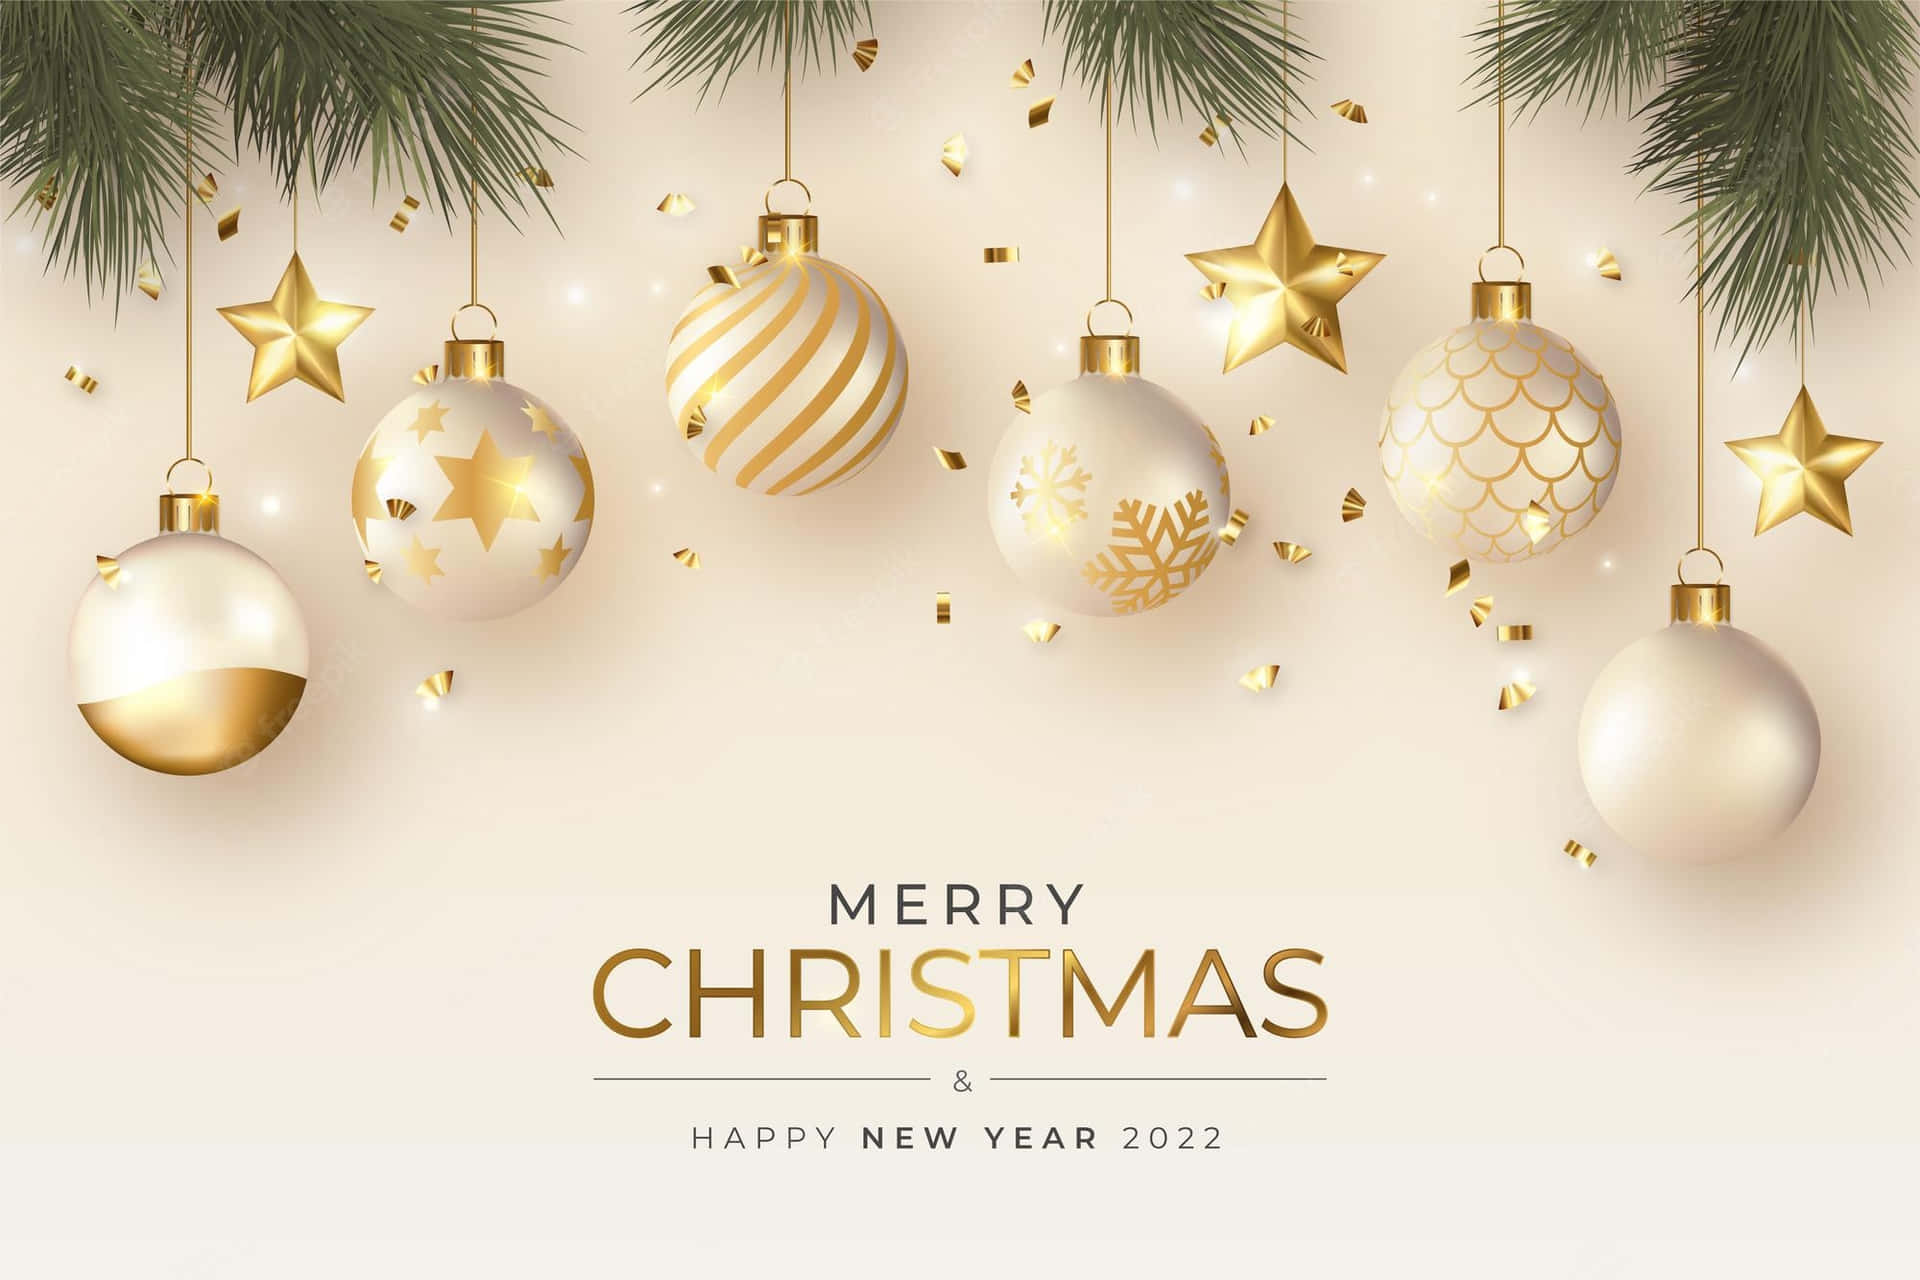 Christmas Background With Gold Balls And Fir Branches Wallpaper